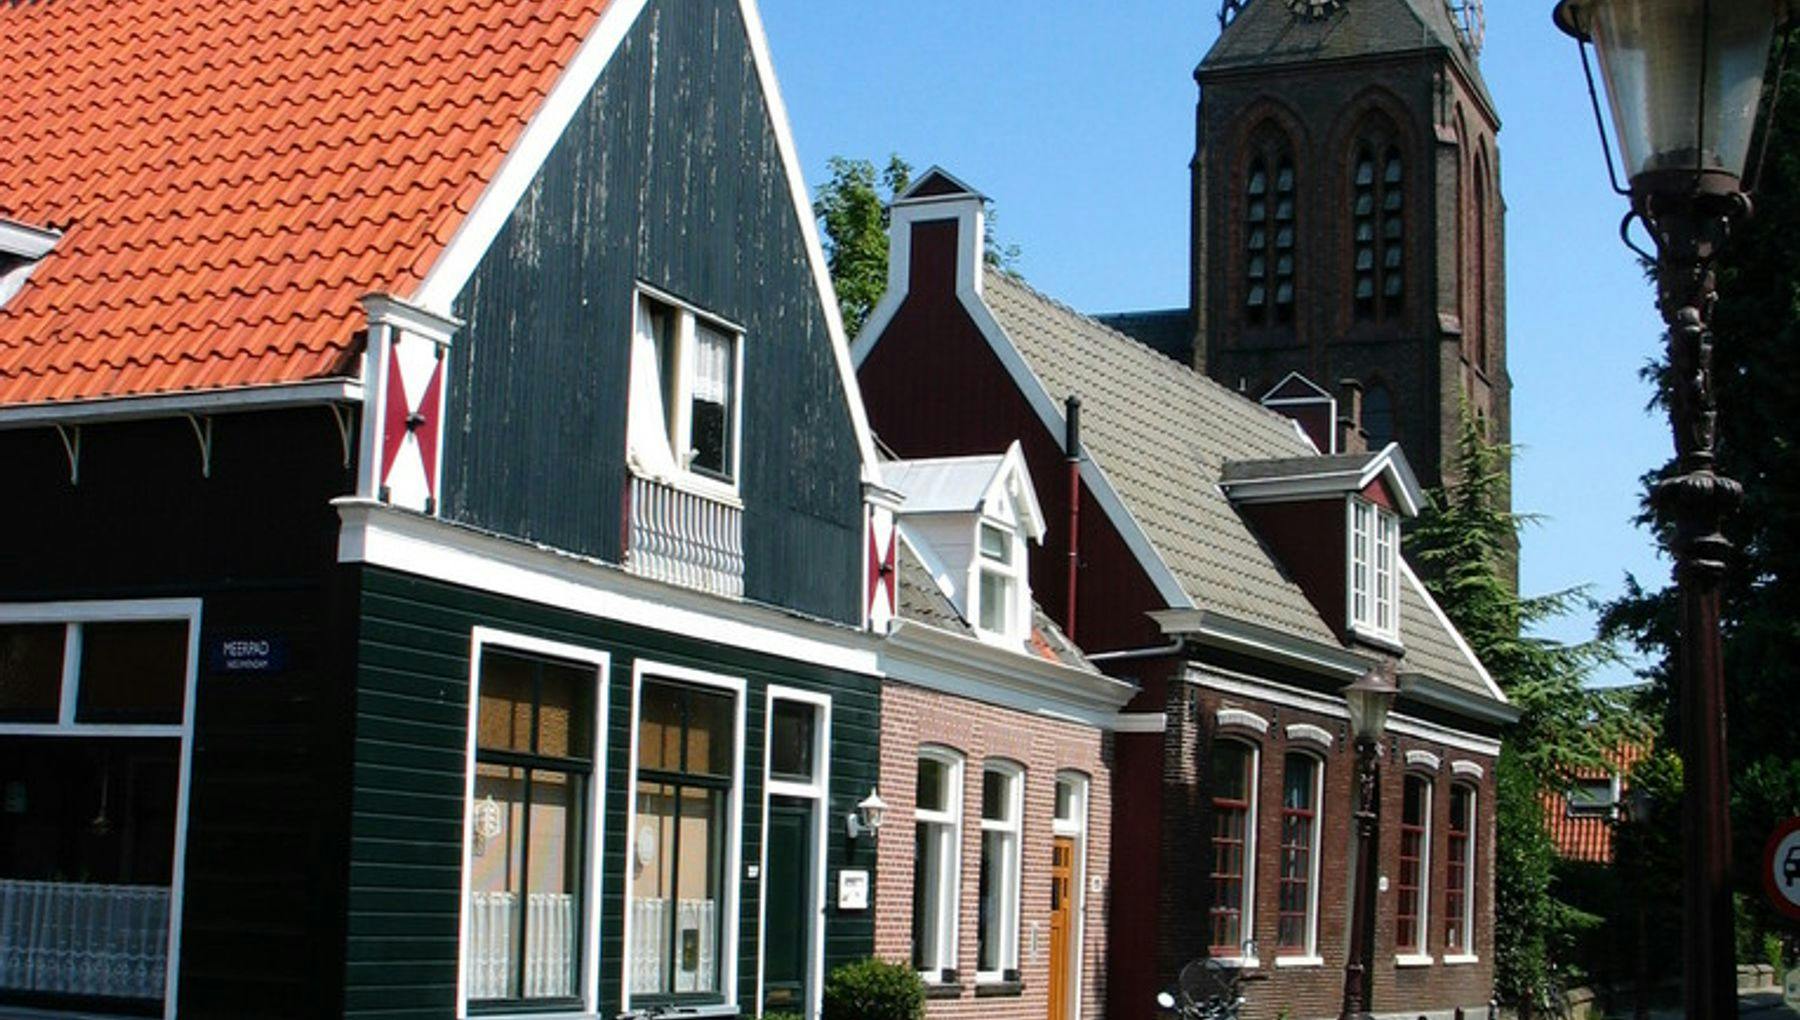 A view of a street in Durgerdammerdijk with traditional houses in sunny weather